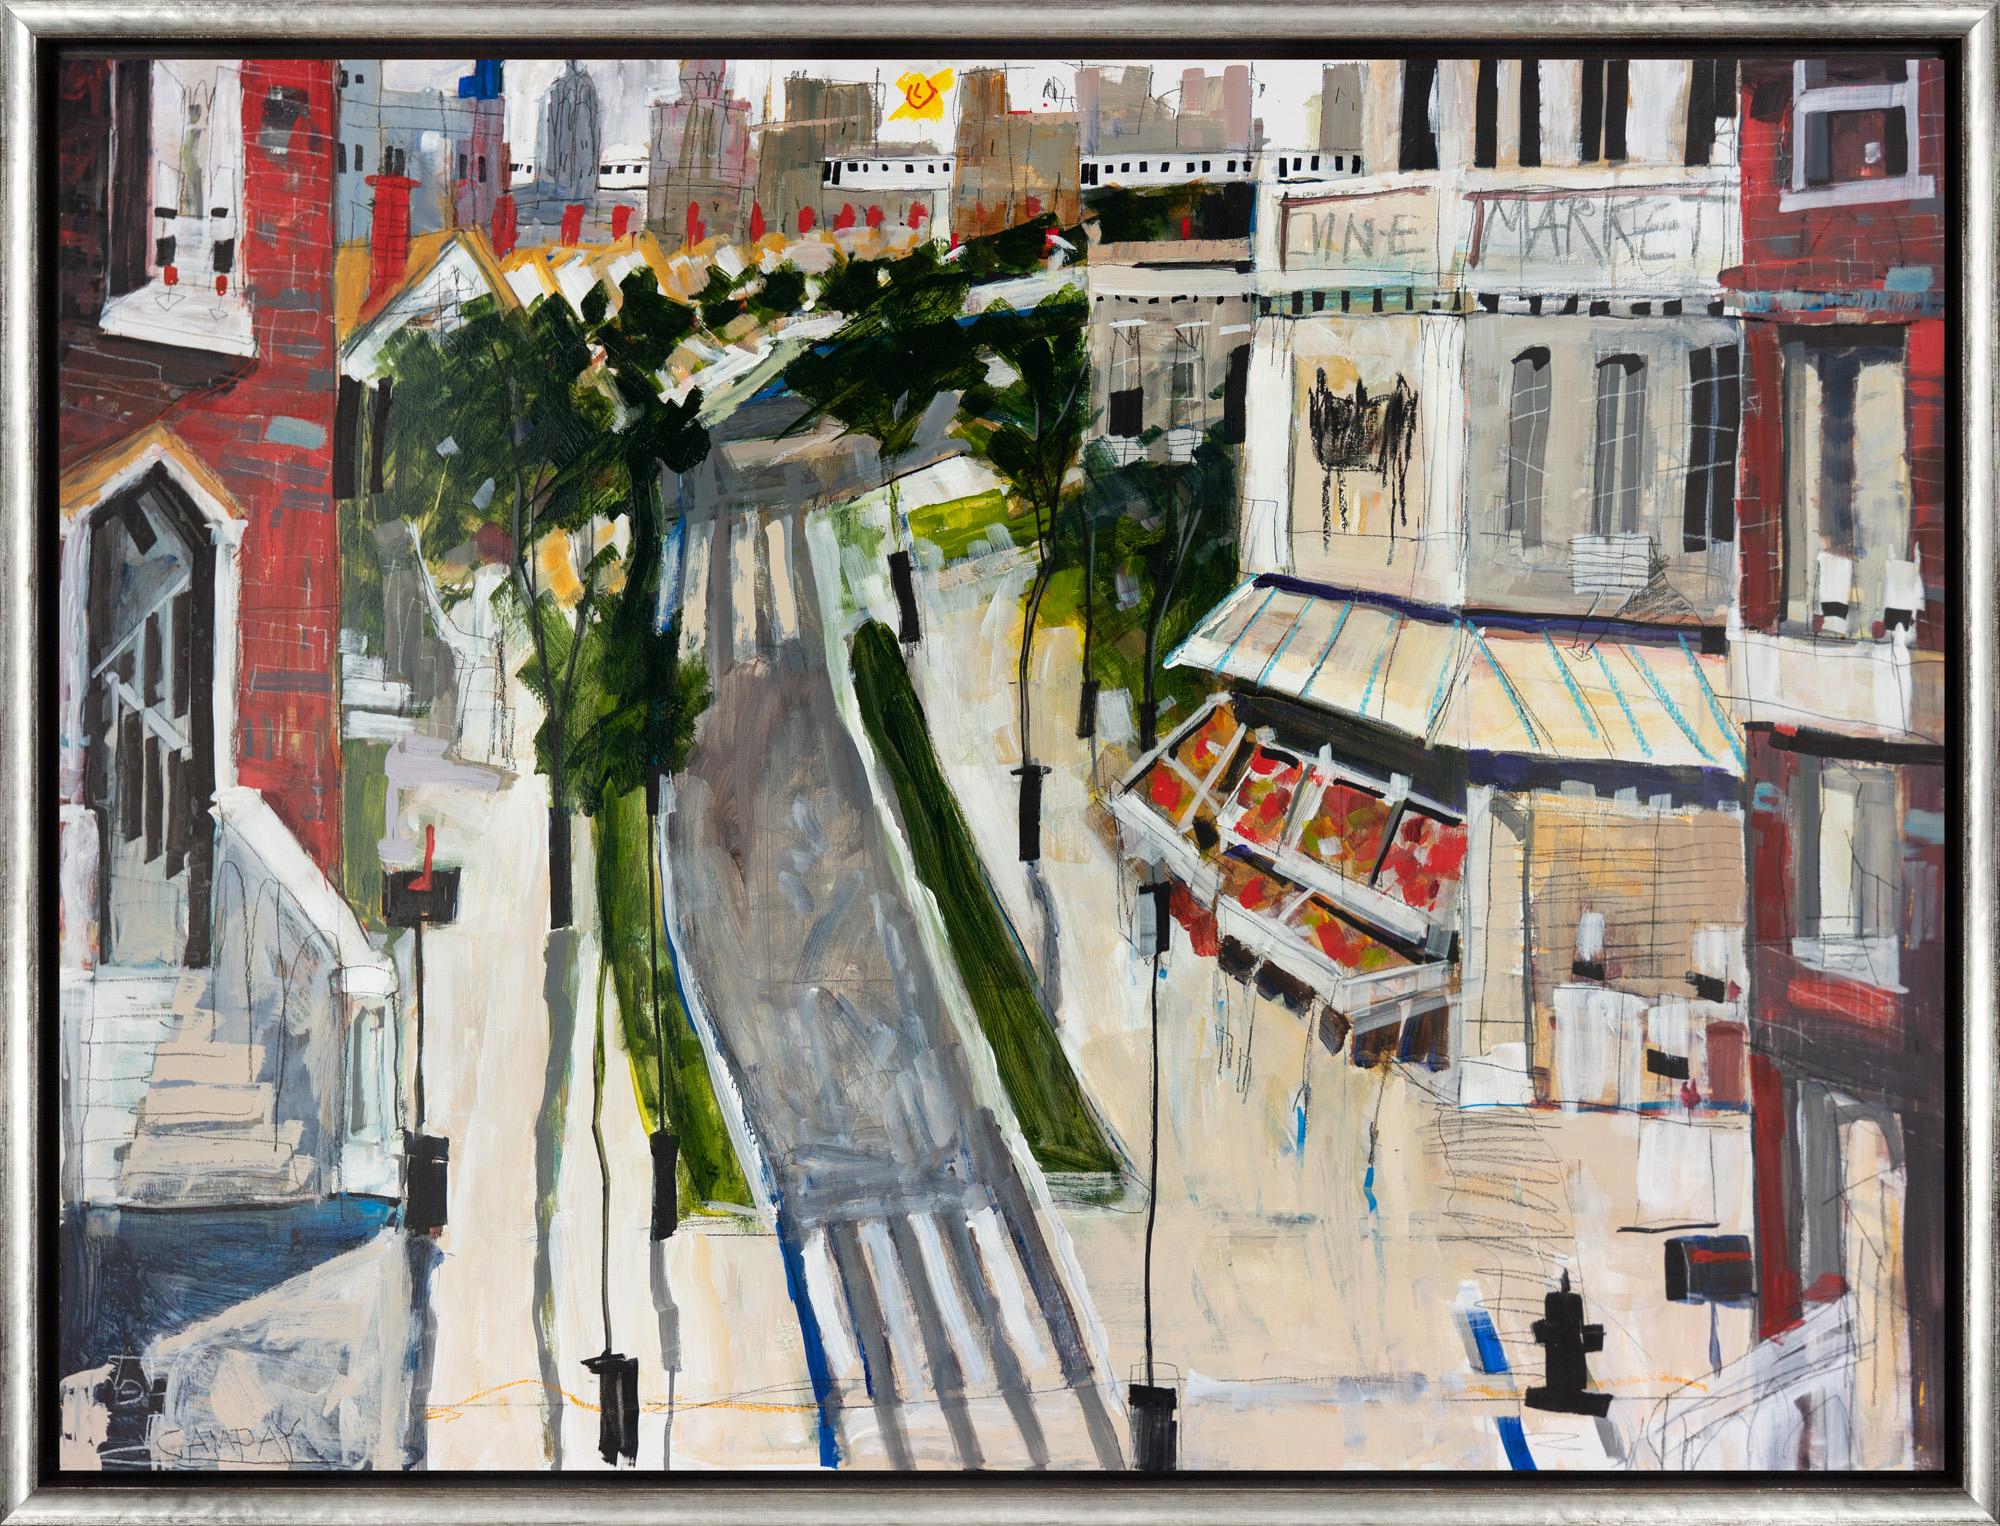 Dennis Campay Landscape Painting - "The Neighborhood" Contemporary Cityscape Mixed Media on Panel Framed Painting